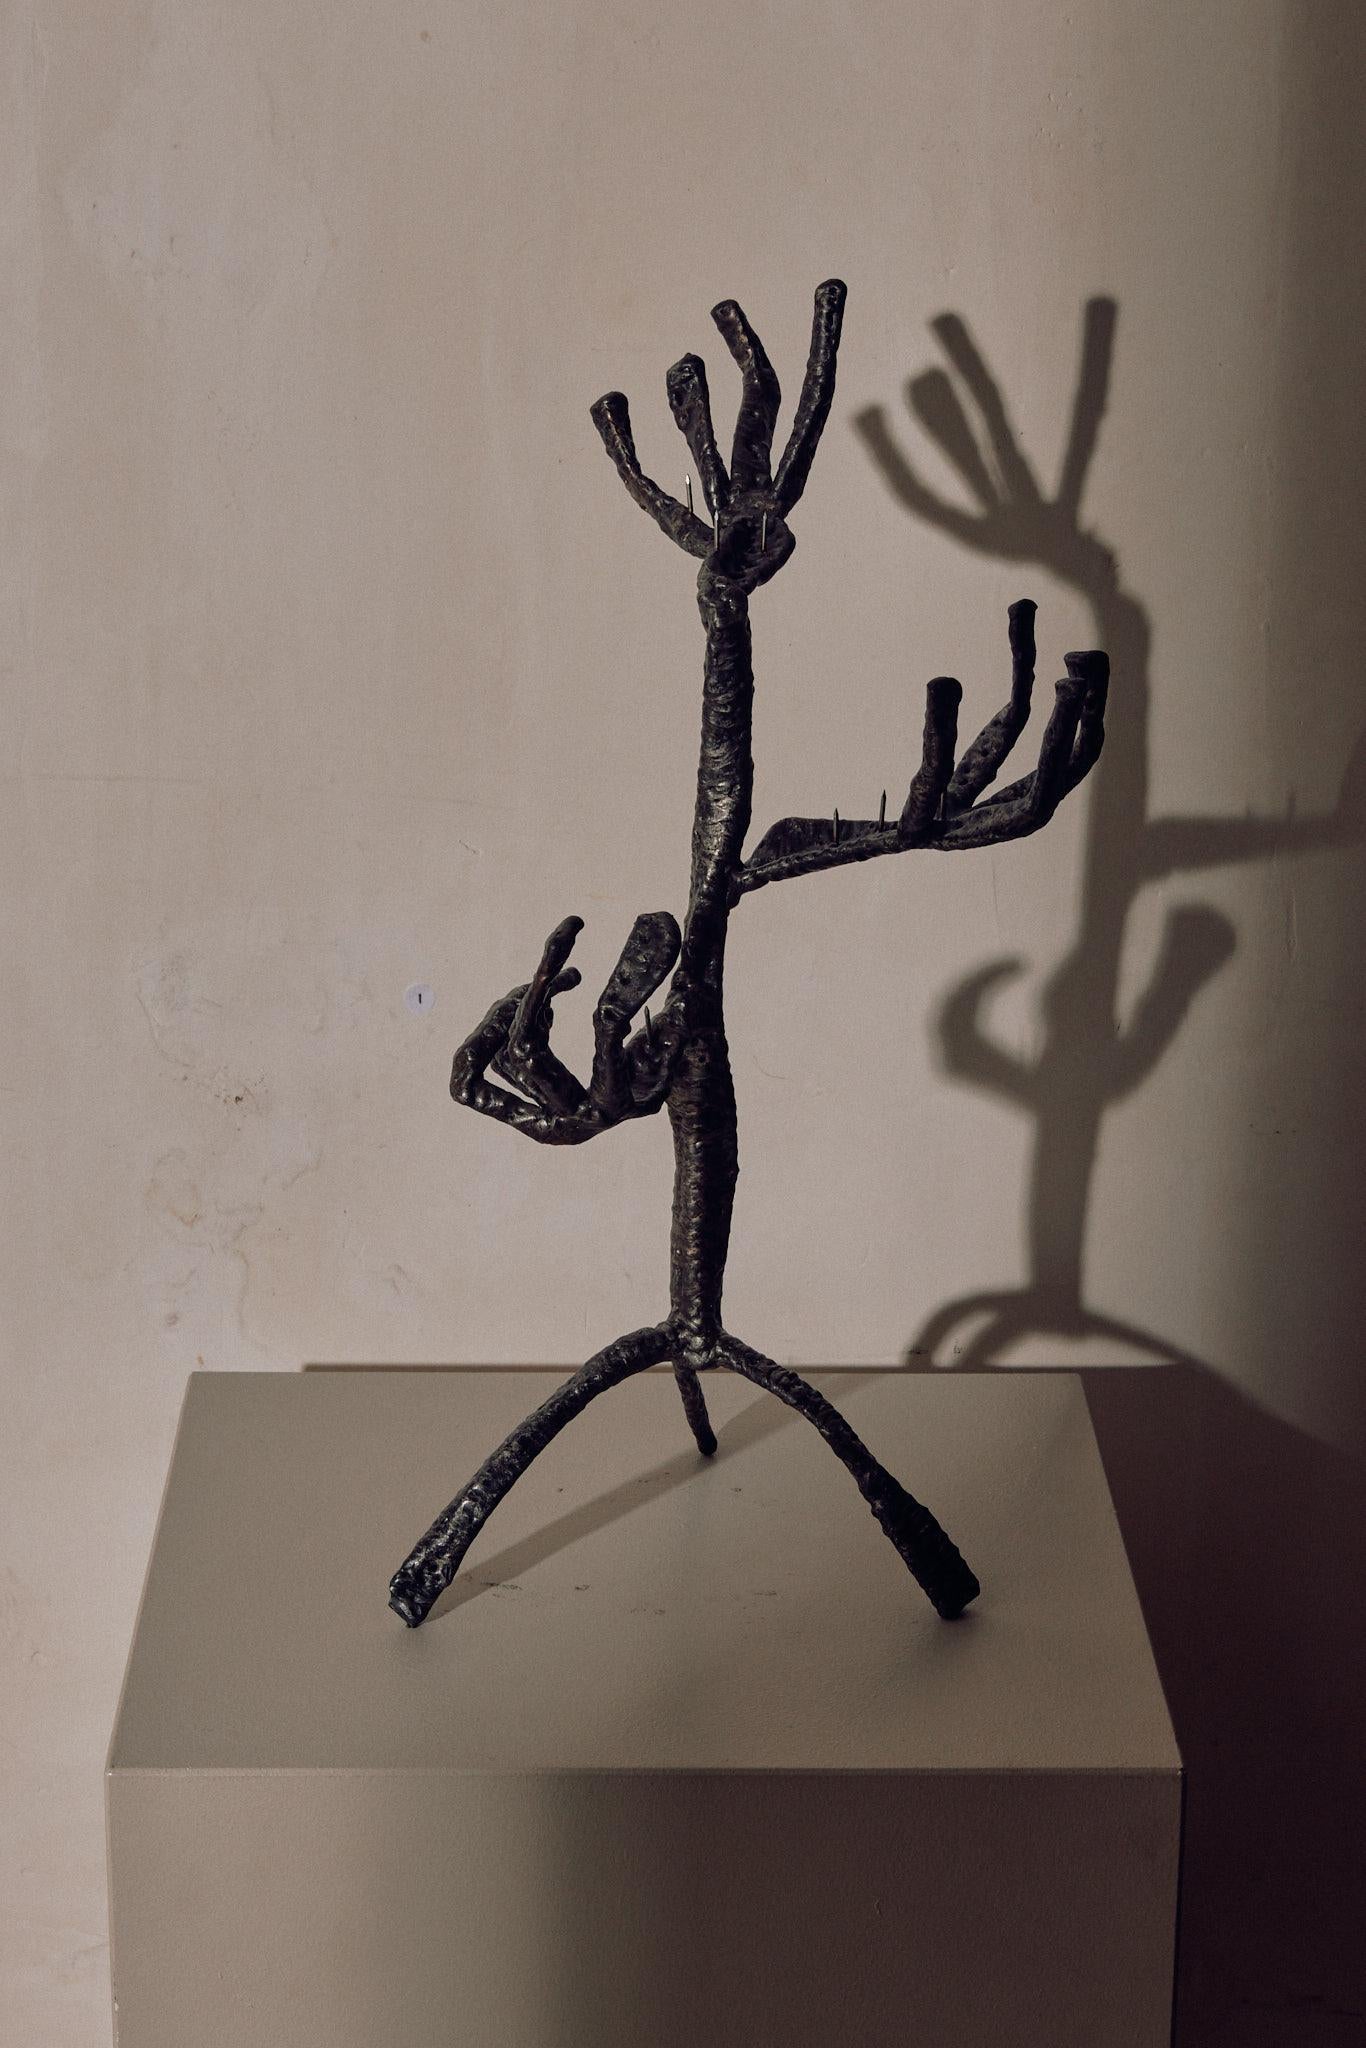 Candelabara cande holder by Michael Gittings
Dimensions: d 60 x w 60 x h 60 cm.
Materials: Stainless steel.

Michael Gittings
Michael Gittings imagines with his hands. Since establishing his studio in 2016, the Melbourne based designer and